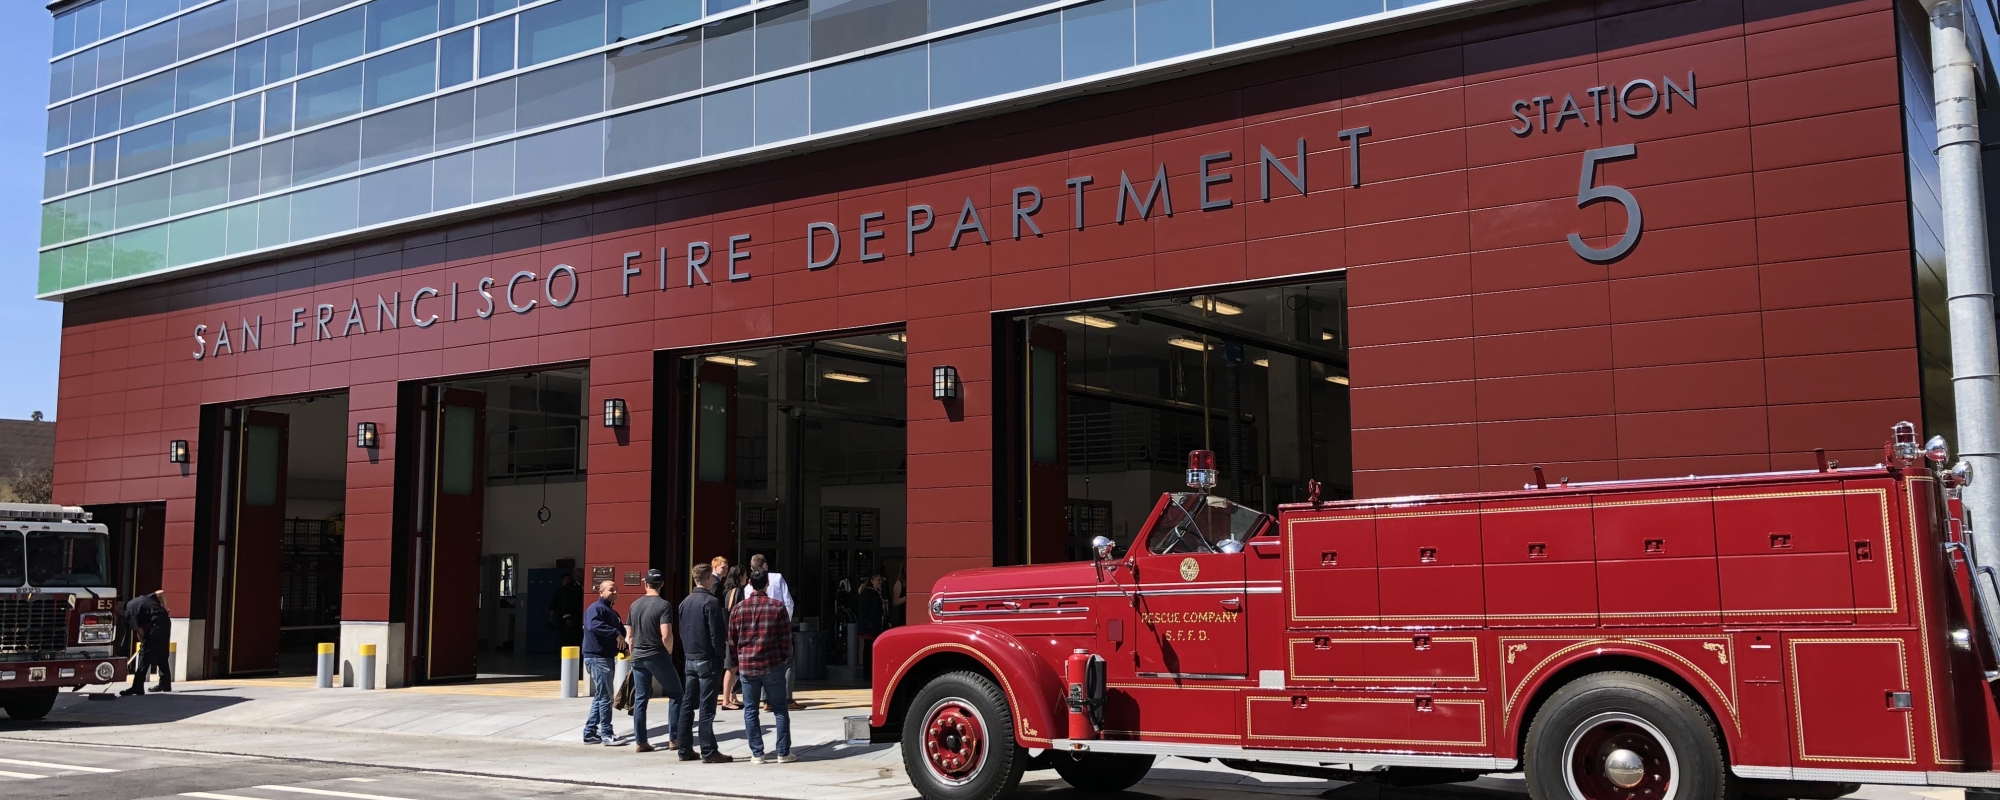 The front of San Francisco Fire Department Fire Station 5